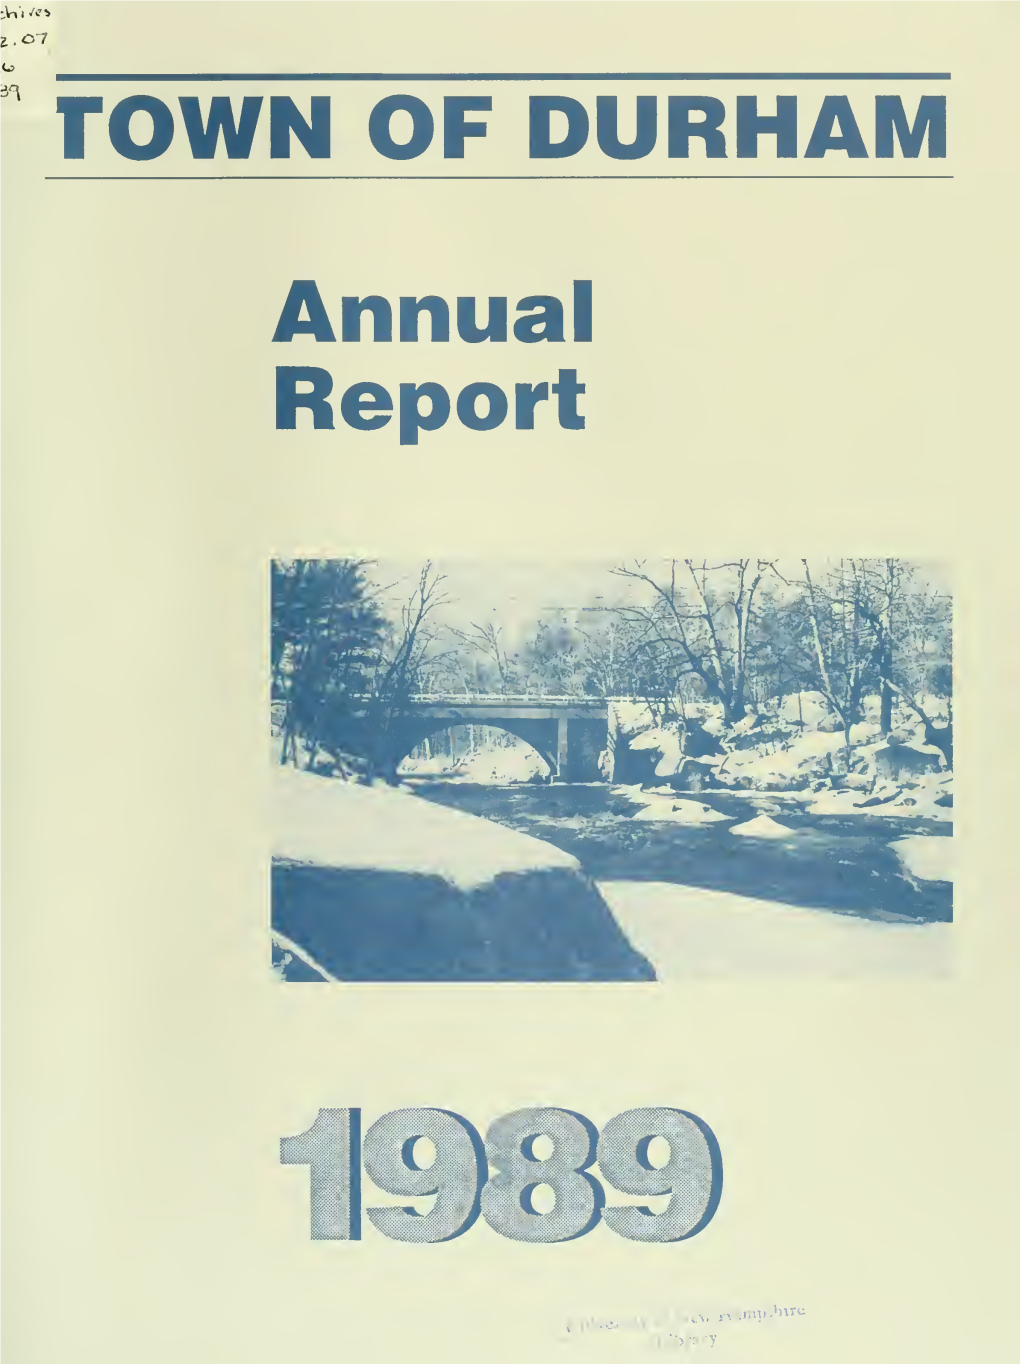 Town of Durham. Annual Report, 1989